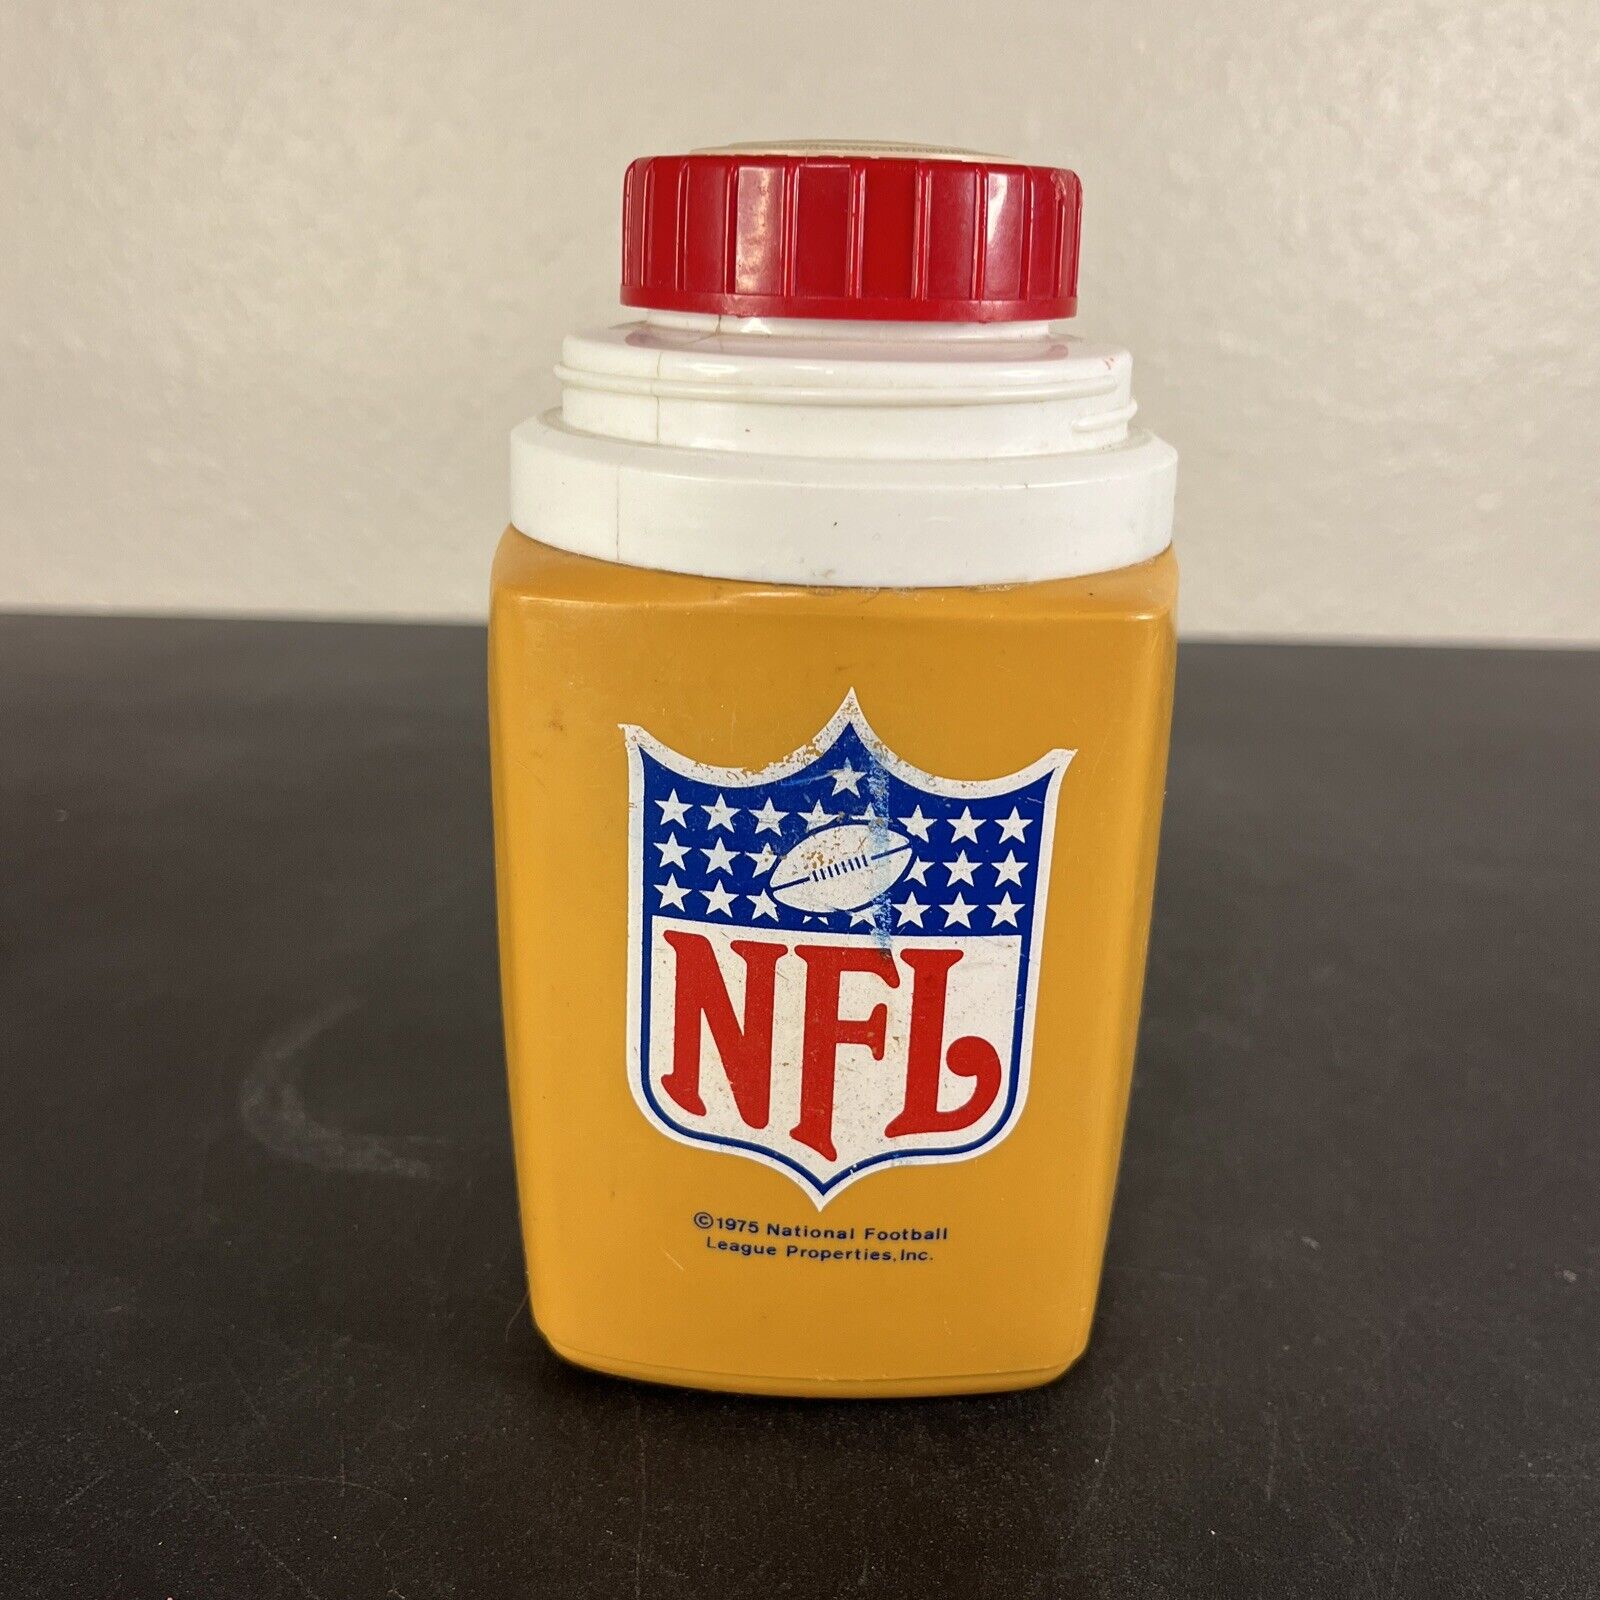 Vintage 1975 NFL National Football League Properties Mustard Brown Thermos 8 oz